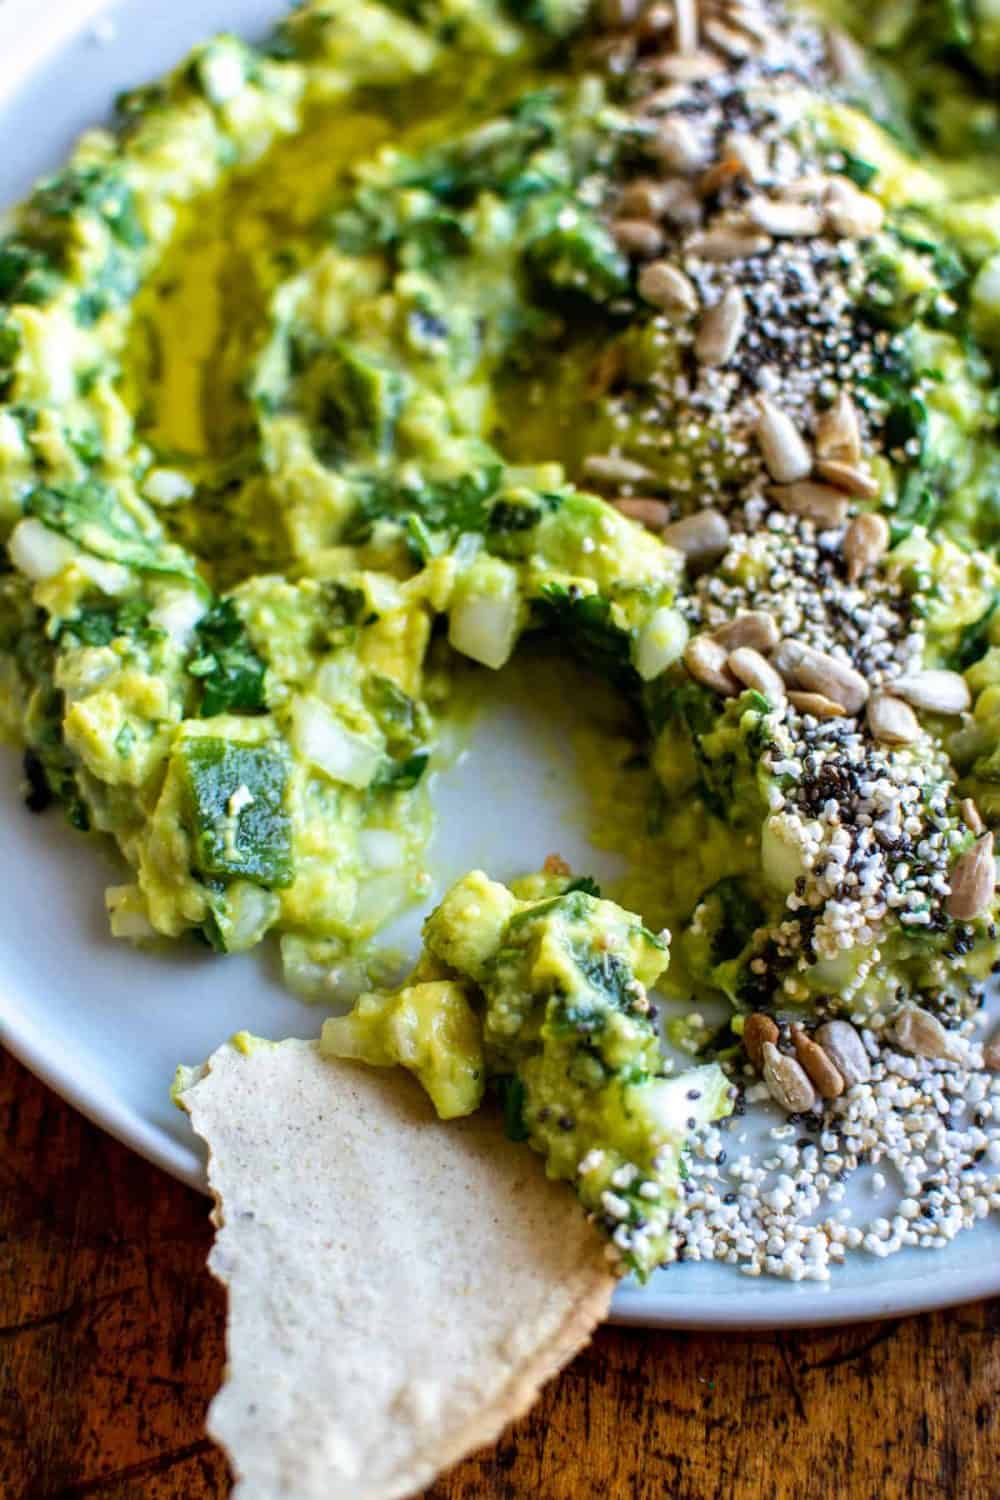 Guacamole wine and food recipes pairing with chardonnay